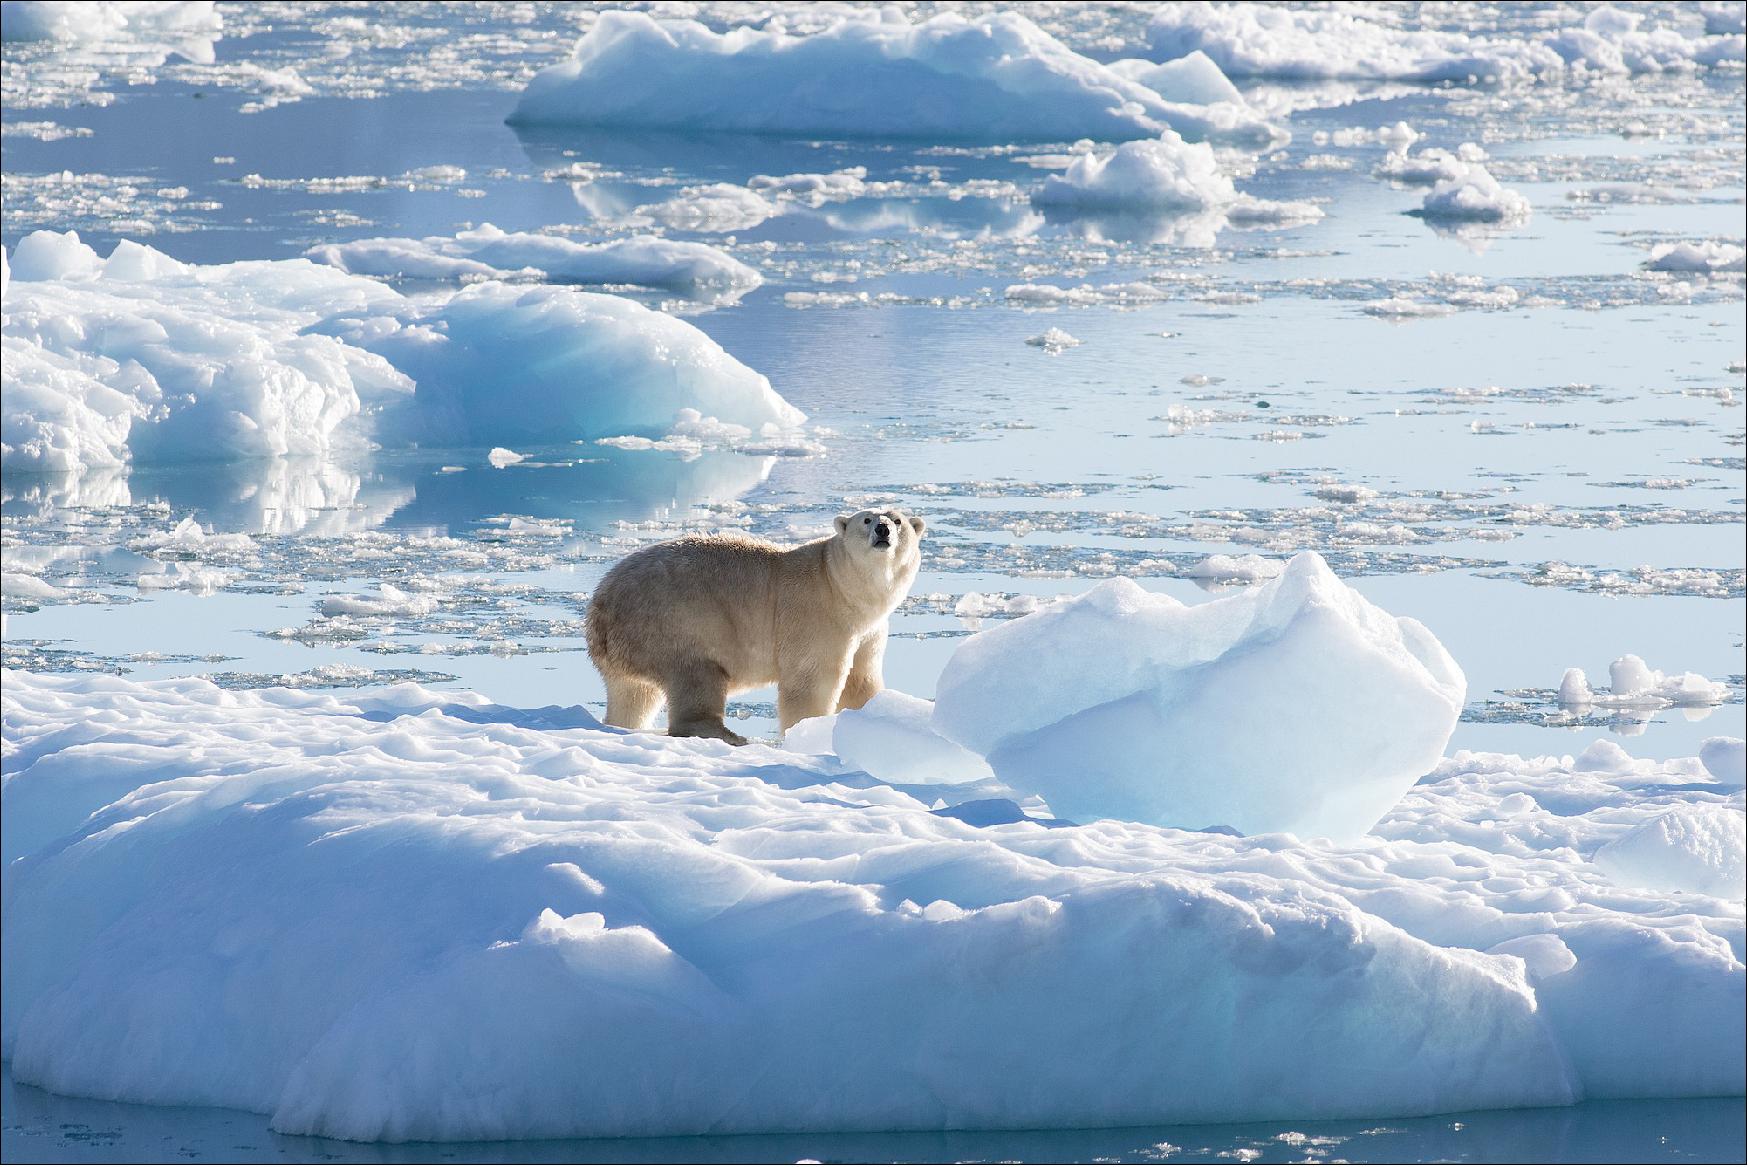 Figure 10: A Southeast Greenland polar bear on glacier, or freshwater, ice at 61º north in September 2016 taken during NASA's Oceans Melting Greenland field mission (image credit: NASA, Thomas W. Johansen)